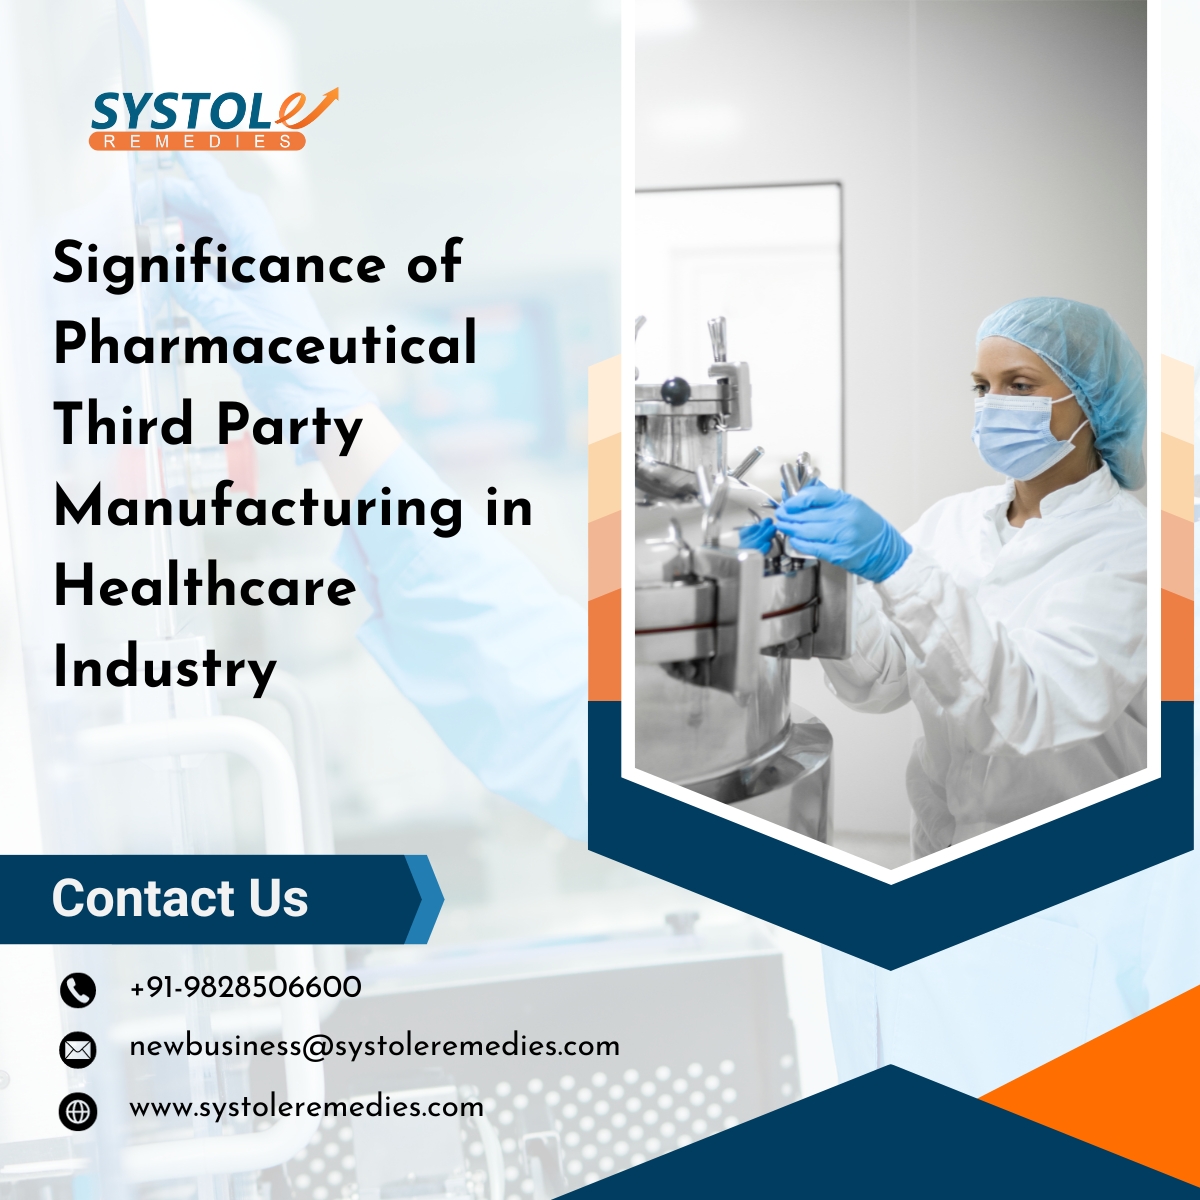 citriclabs|Significance of Pharmaceutical Third Party Manufacturing in Healthcare Industry 